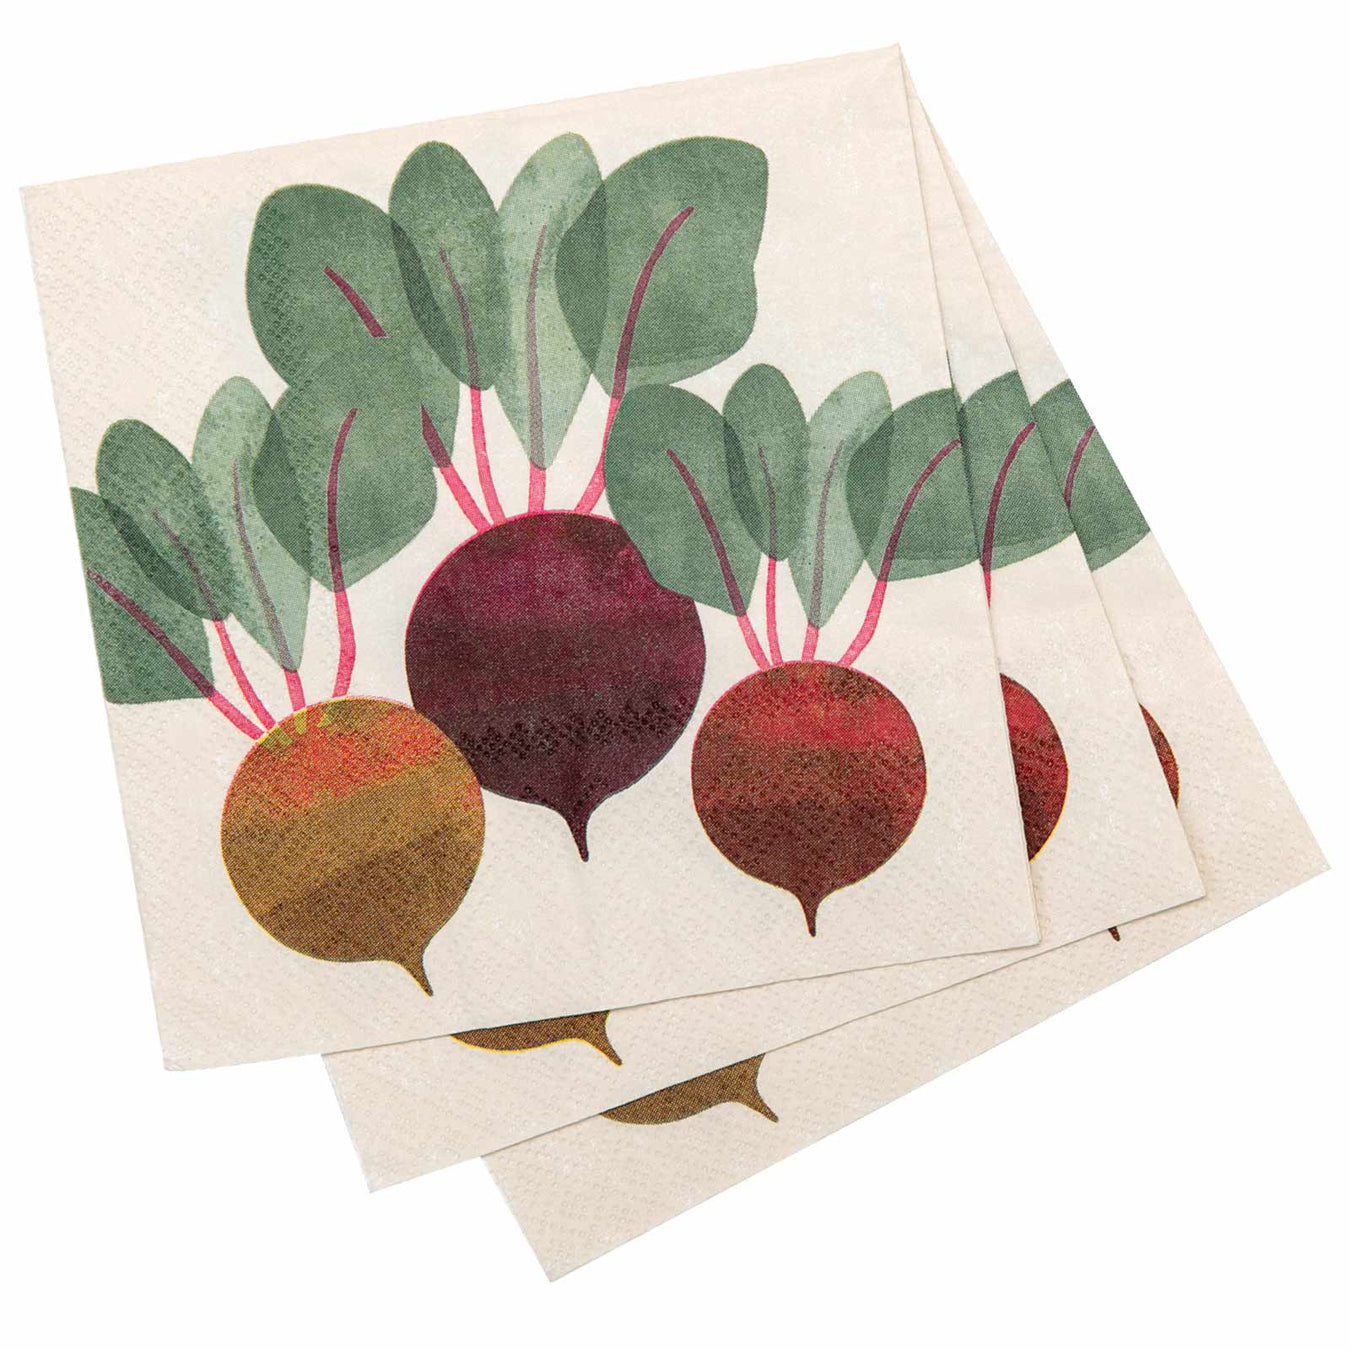 The Three Beets Collection